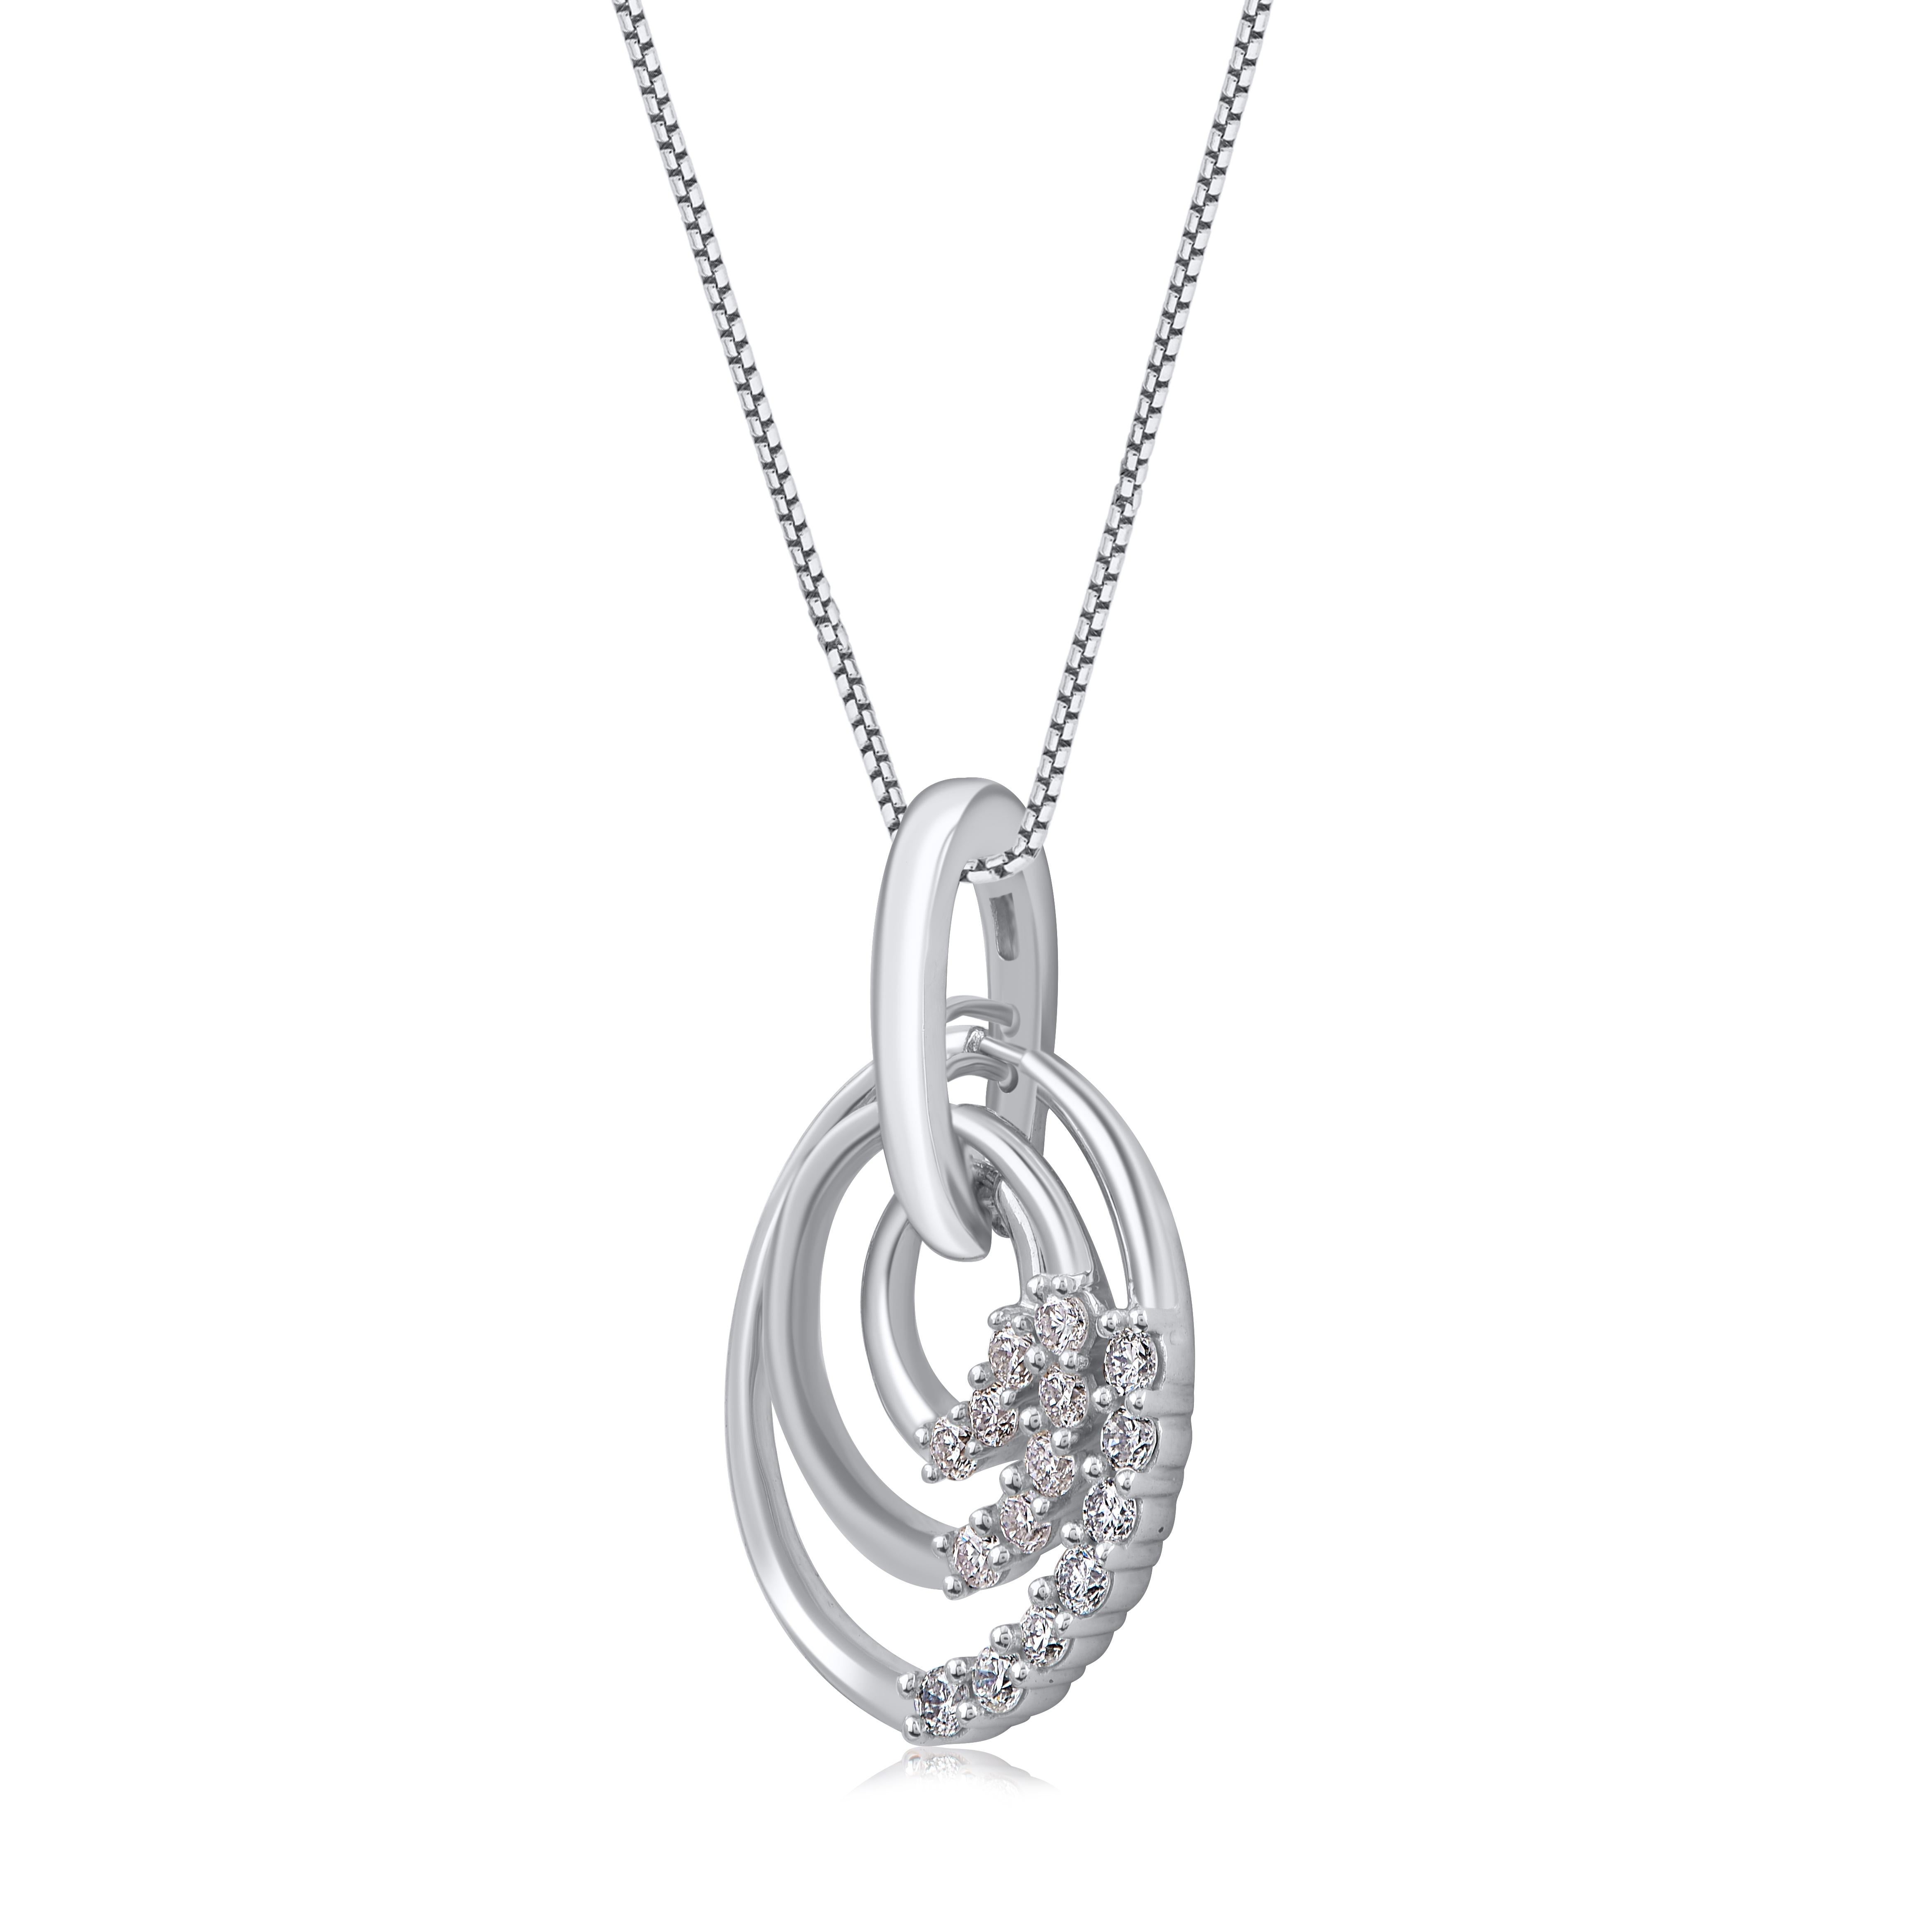 Bring sparkle to your favorite casual or dressy looks with this diamond graduated circles pendant. This diamond pendant is crafted from 14-karat white gold and features 15 brilliant cut diamonds set in prong setting. H-I color I2 clarity and a high